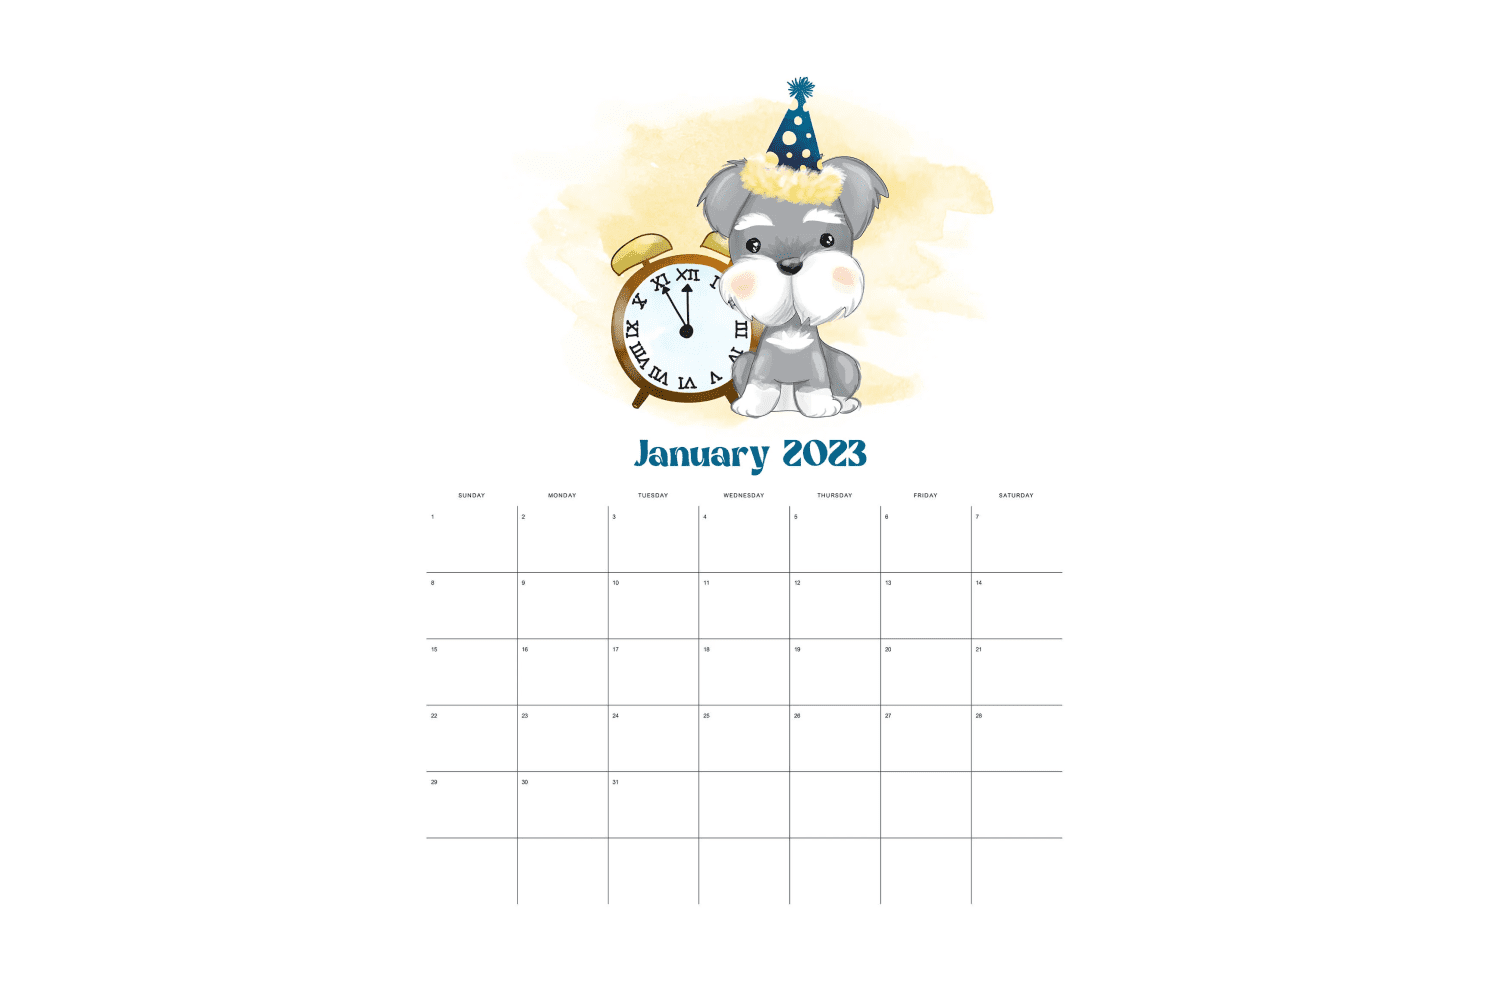 January calendar with drawn dog and table clock.